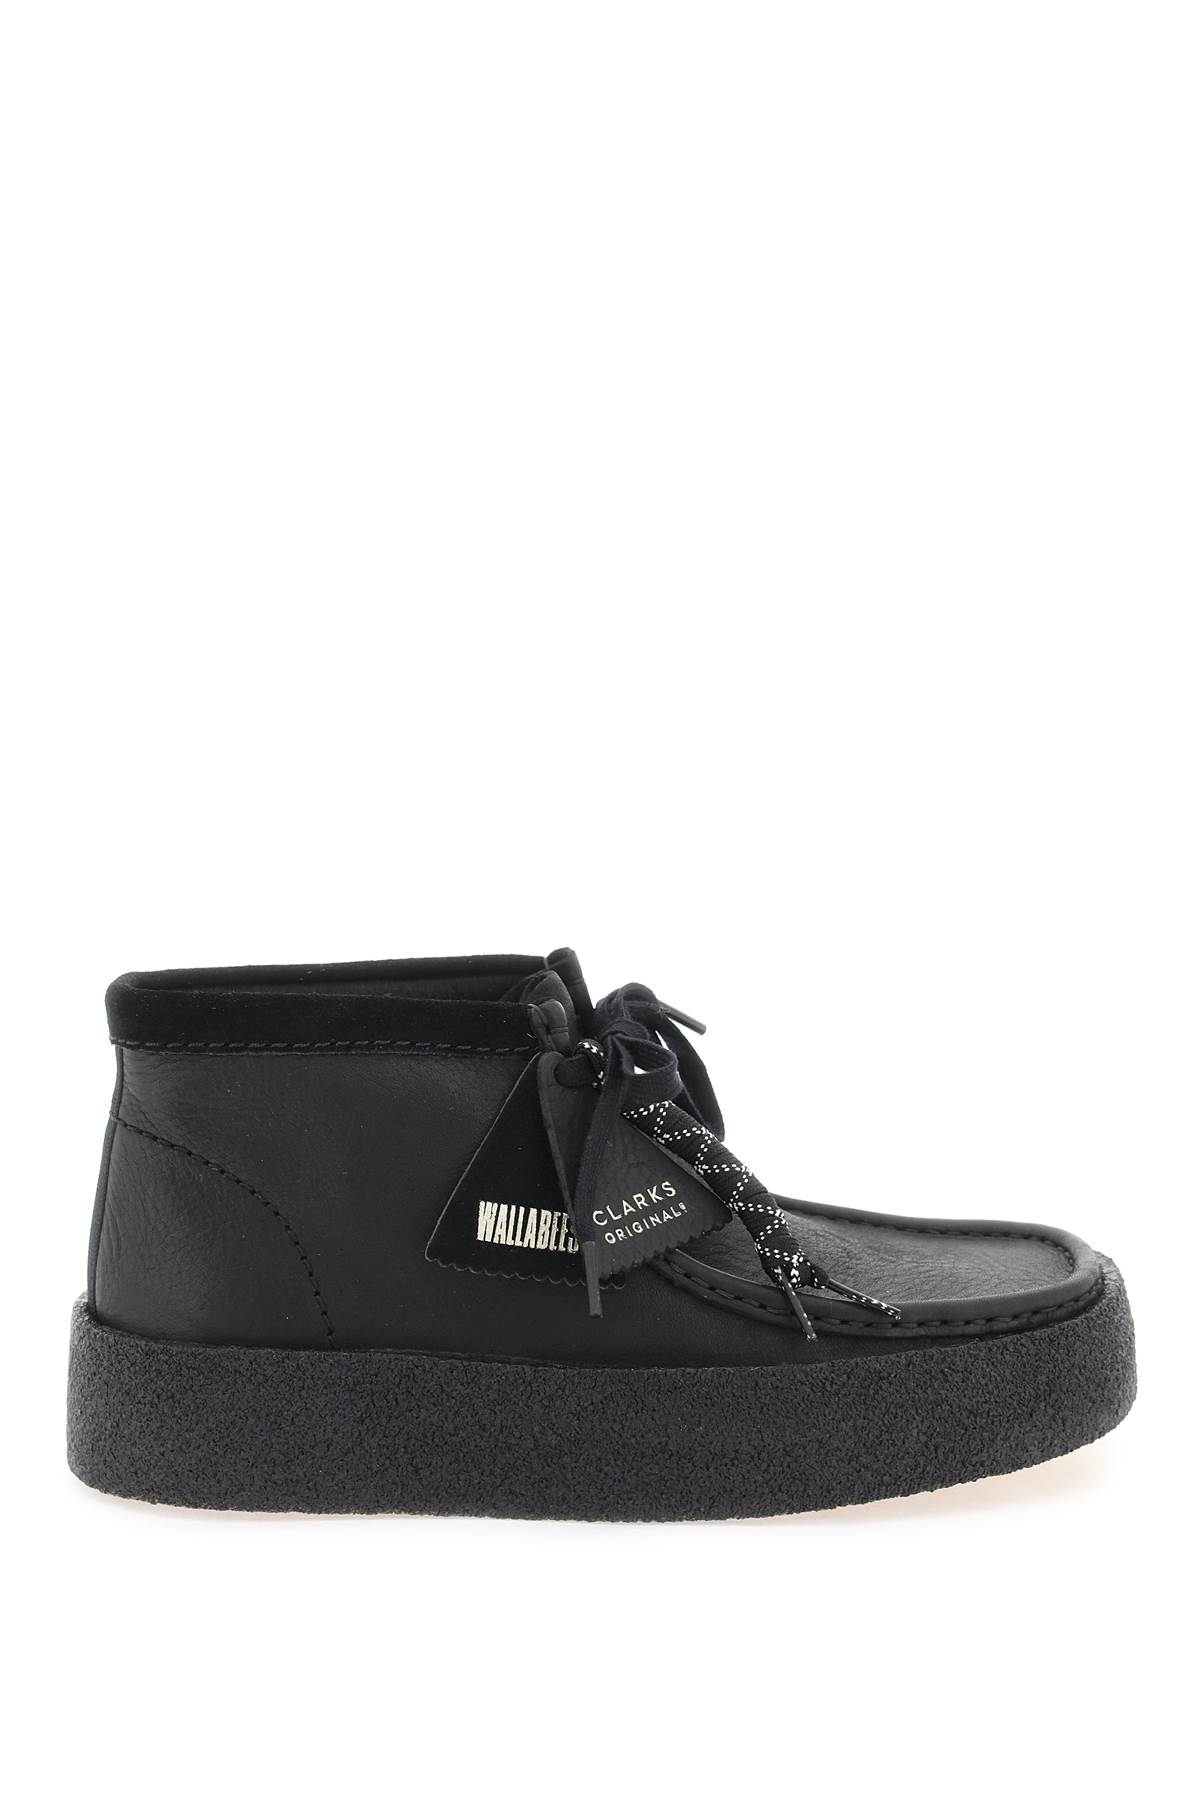 wallabee Cup Bt Lace-up Shoes